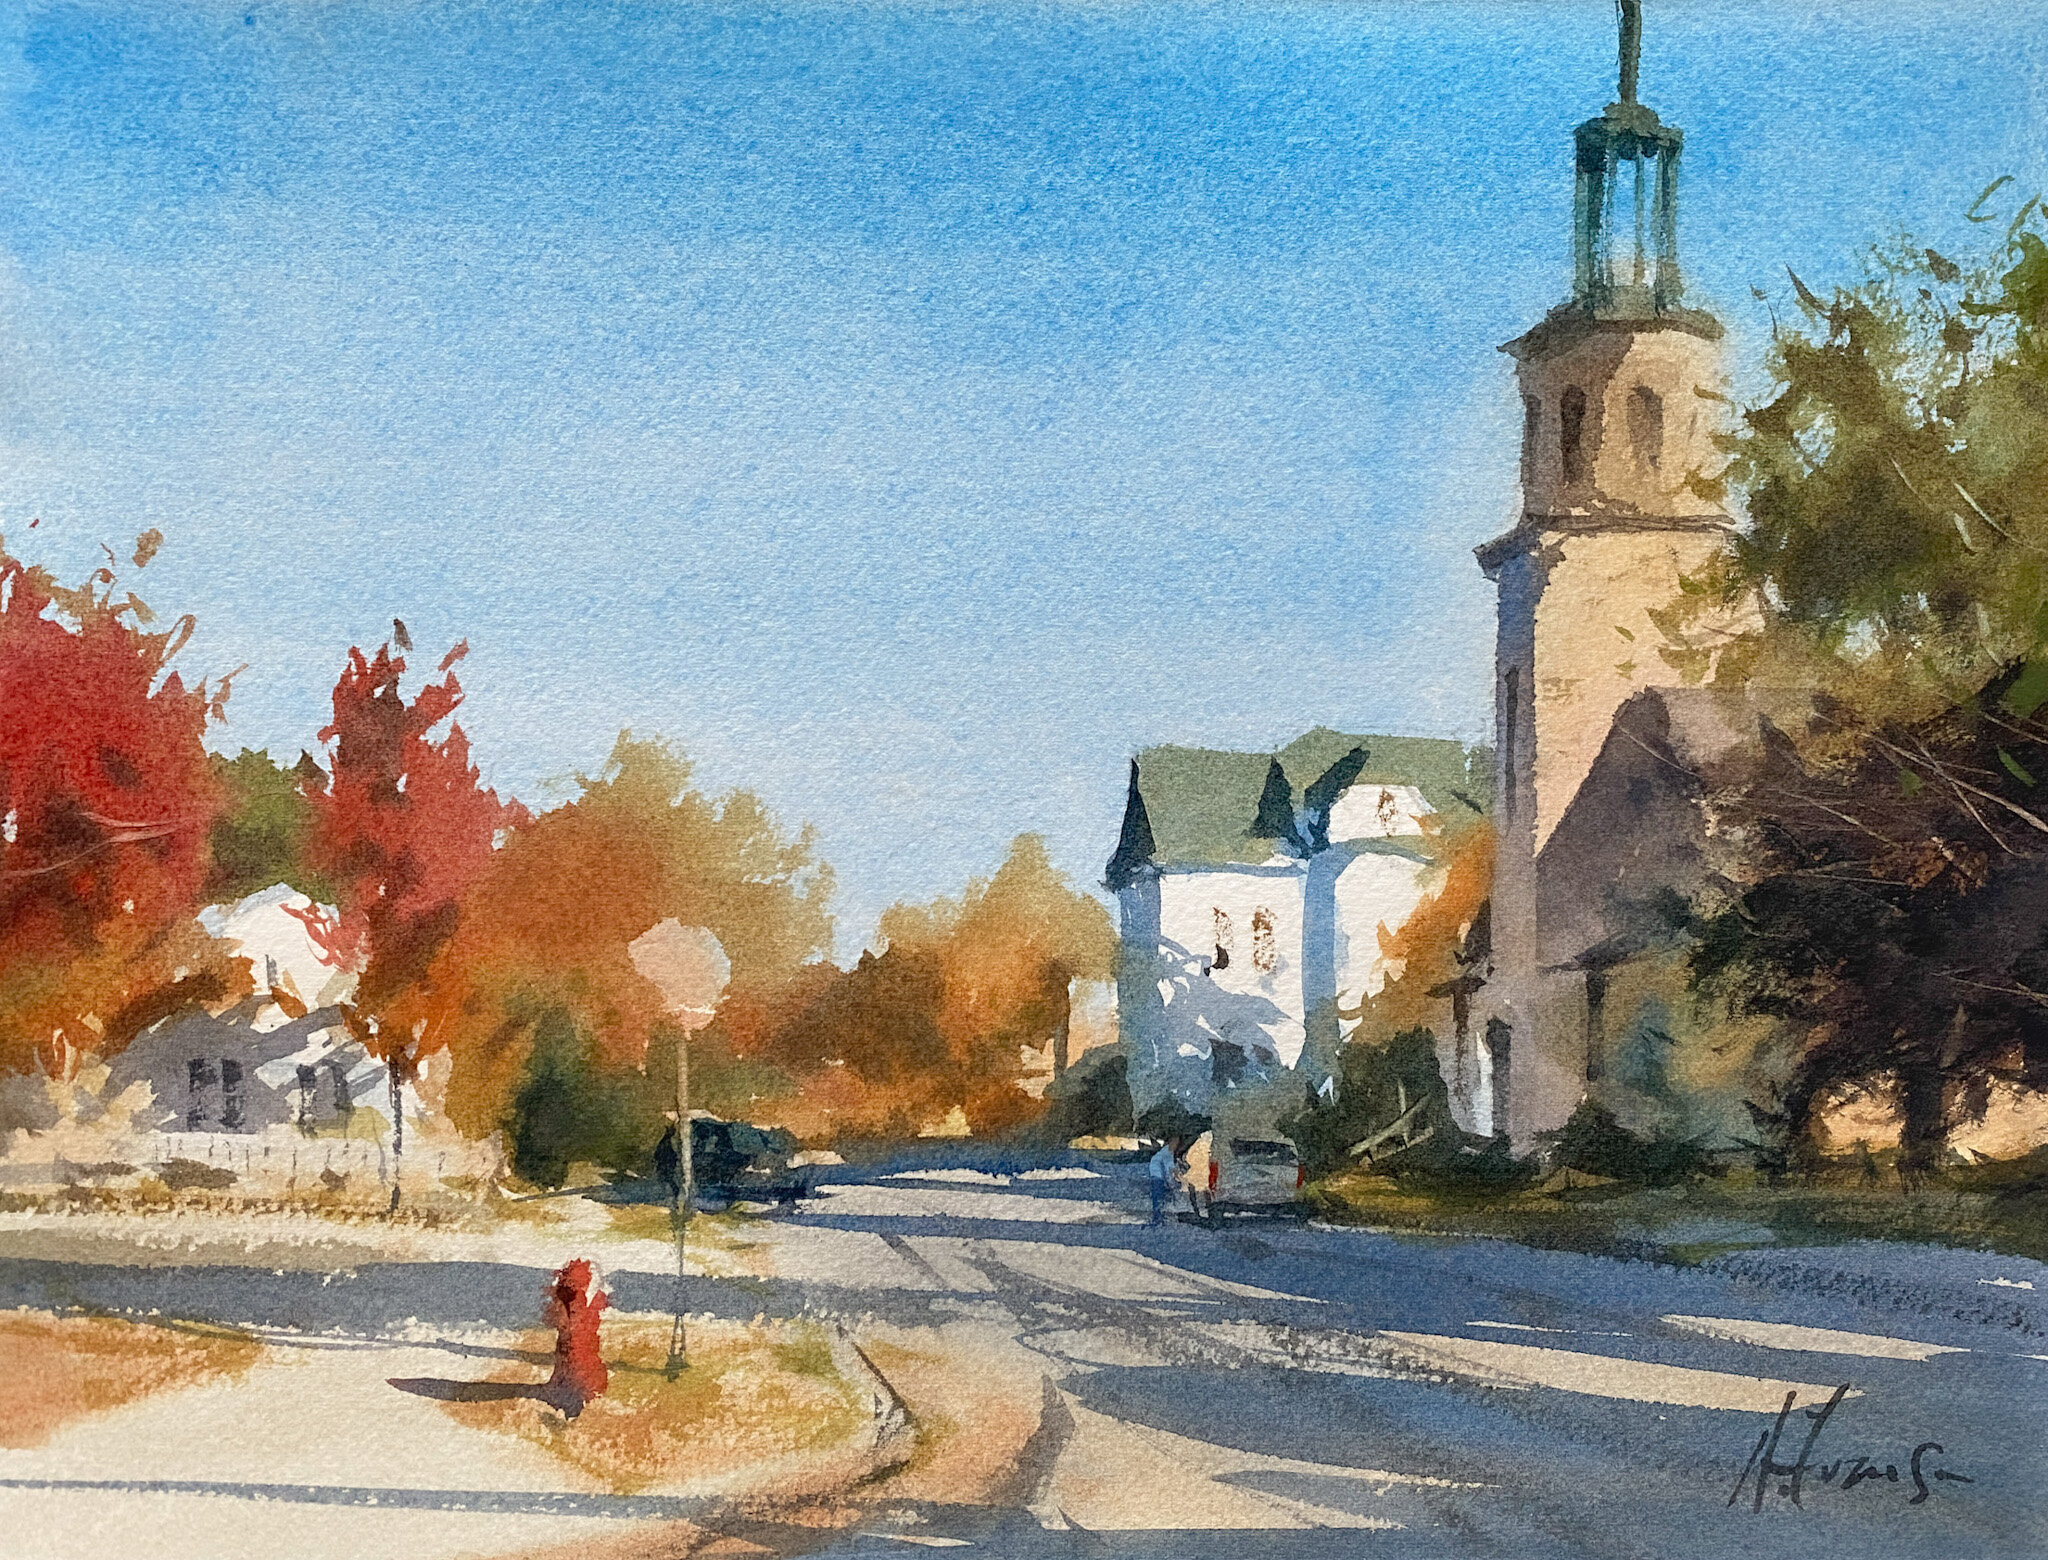 ANDY EVANSEN watercolor mentoring Online workshop course -“Watercolors For All Seasons”. Mentoring, feedback, and video lessons for a year.